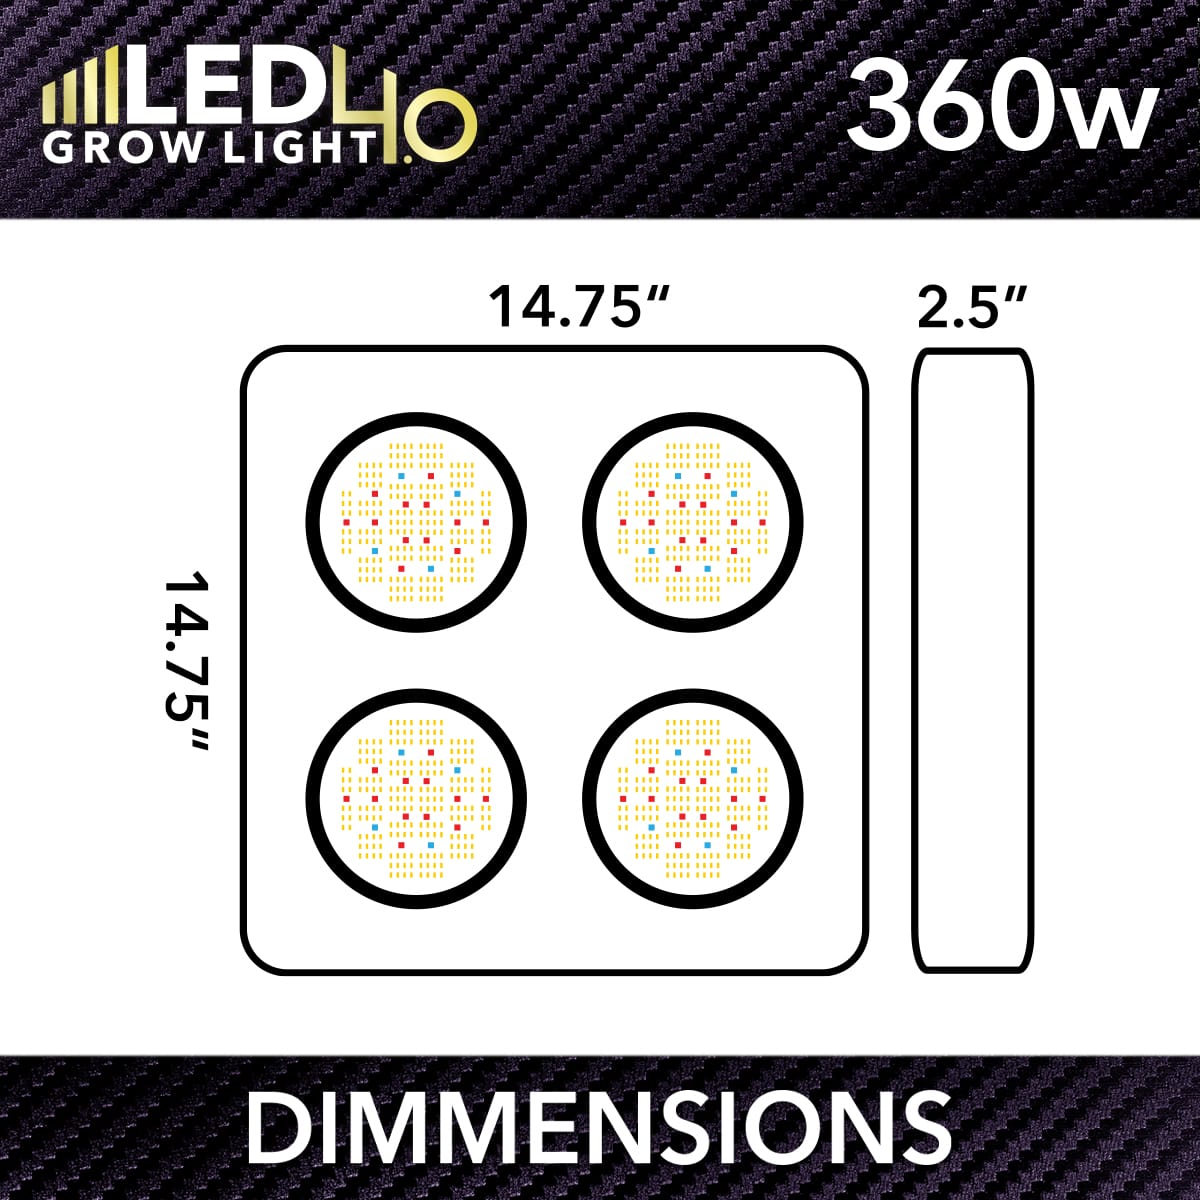 Htg Led 4.0 Dimmensions 360W (1)